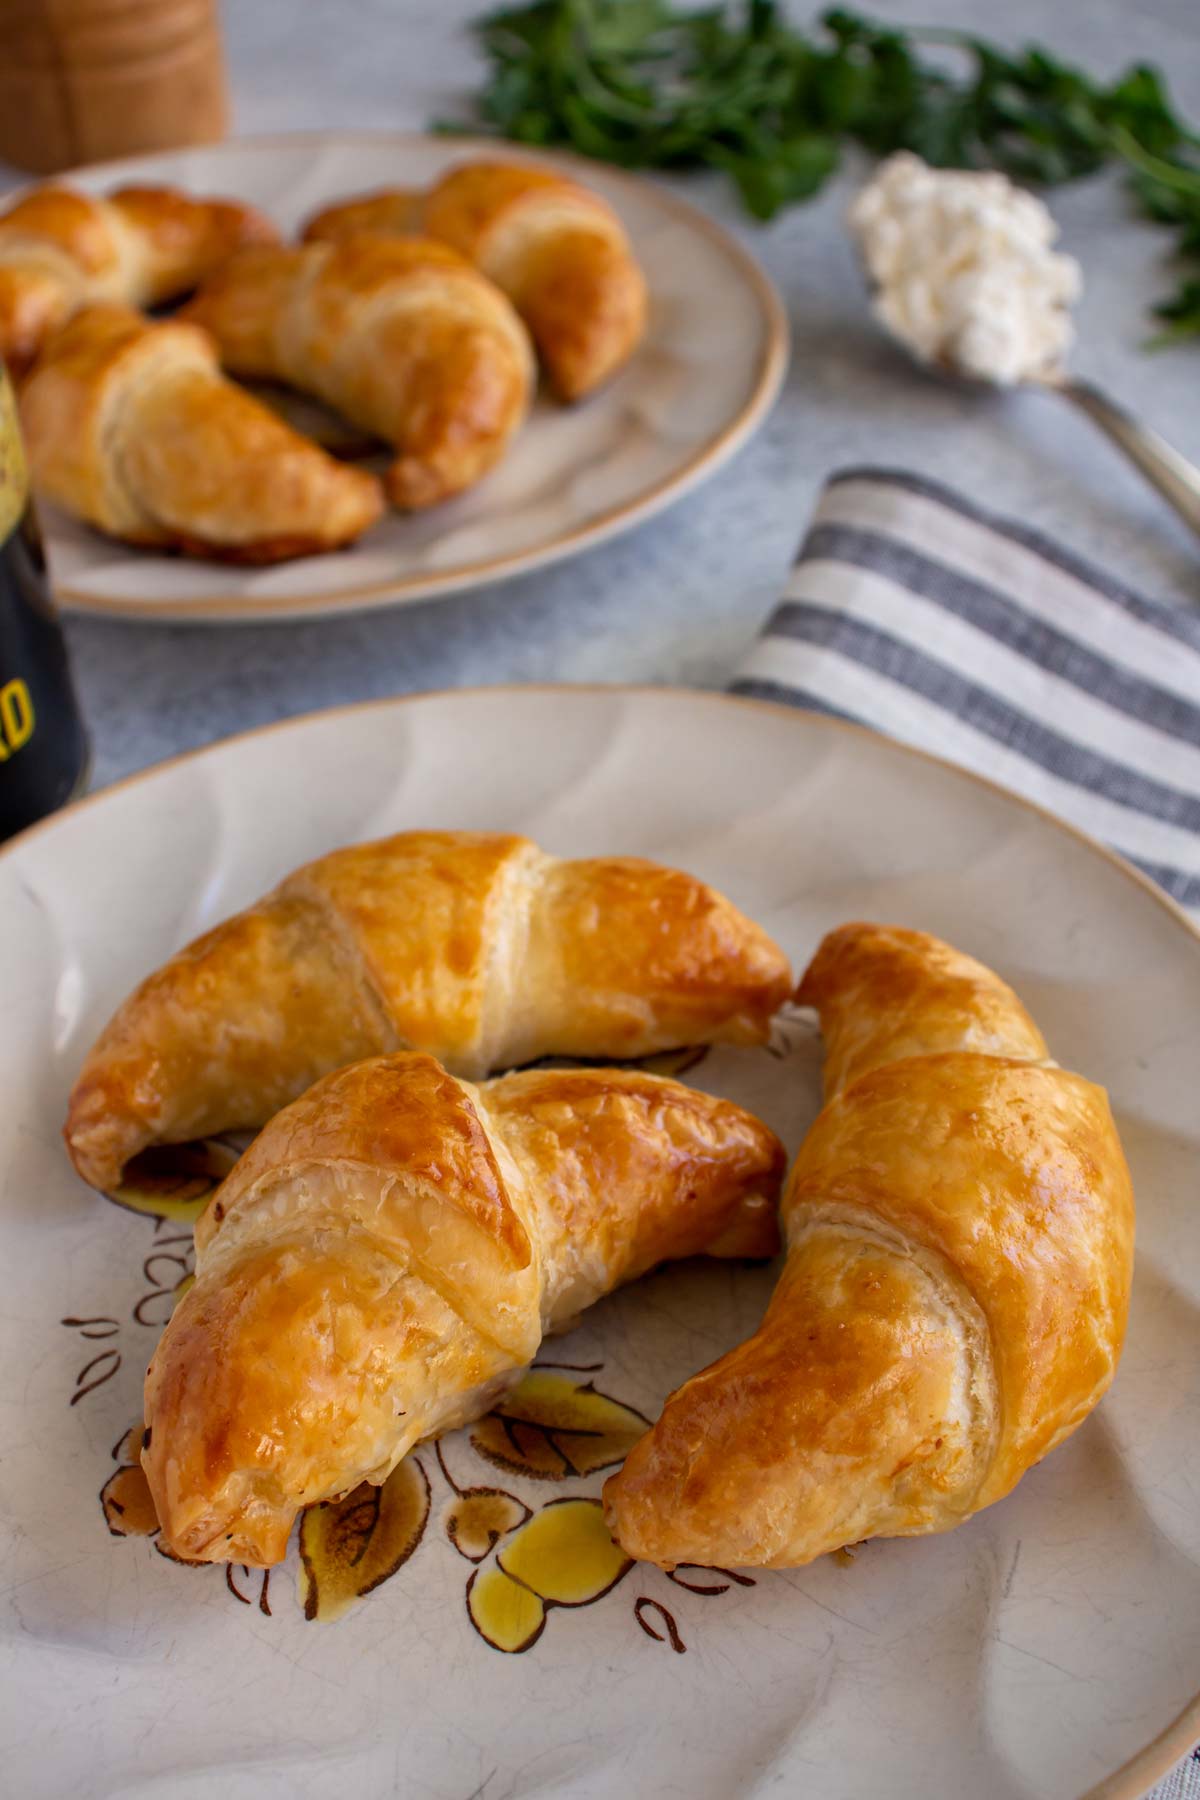 Closeup of three small golden brown ham croissants on a plate with more in the background.